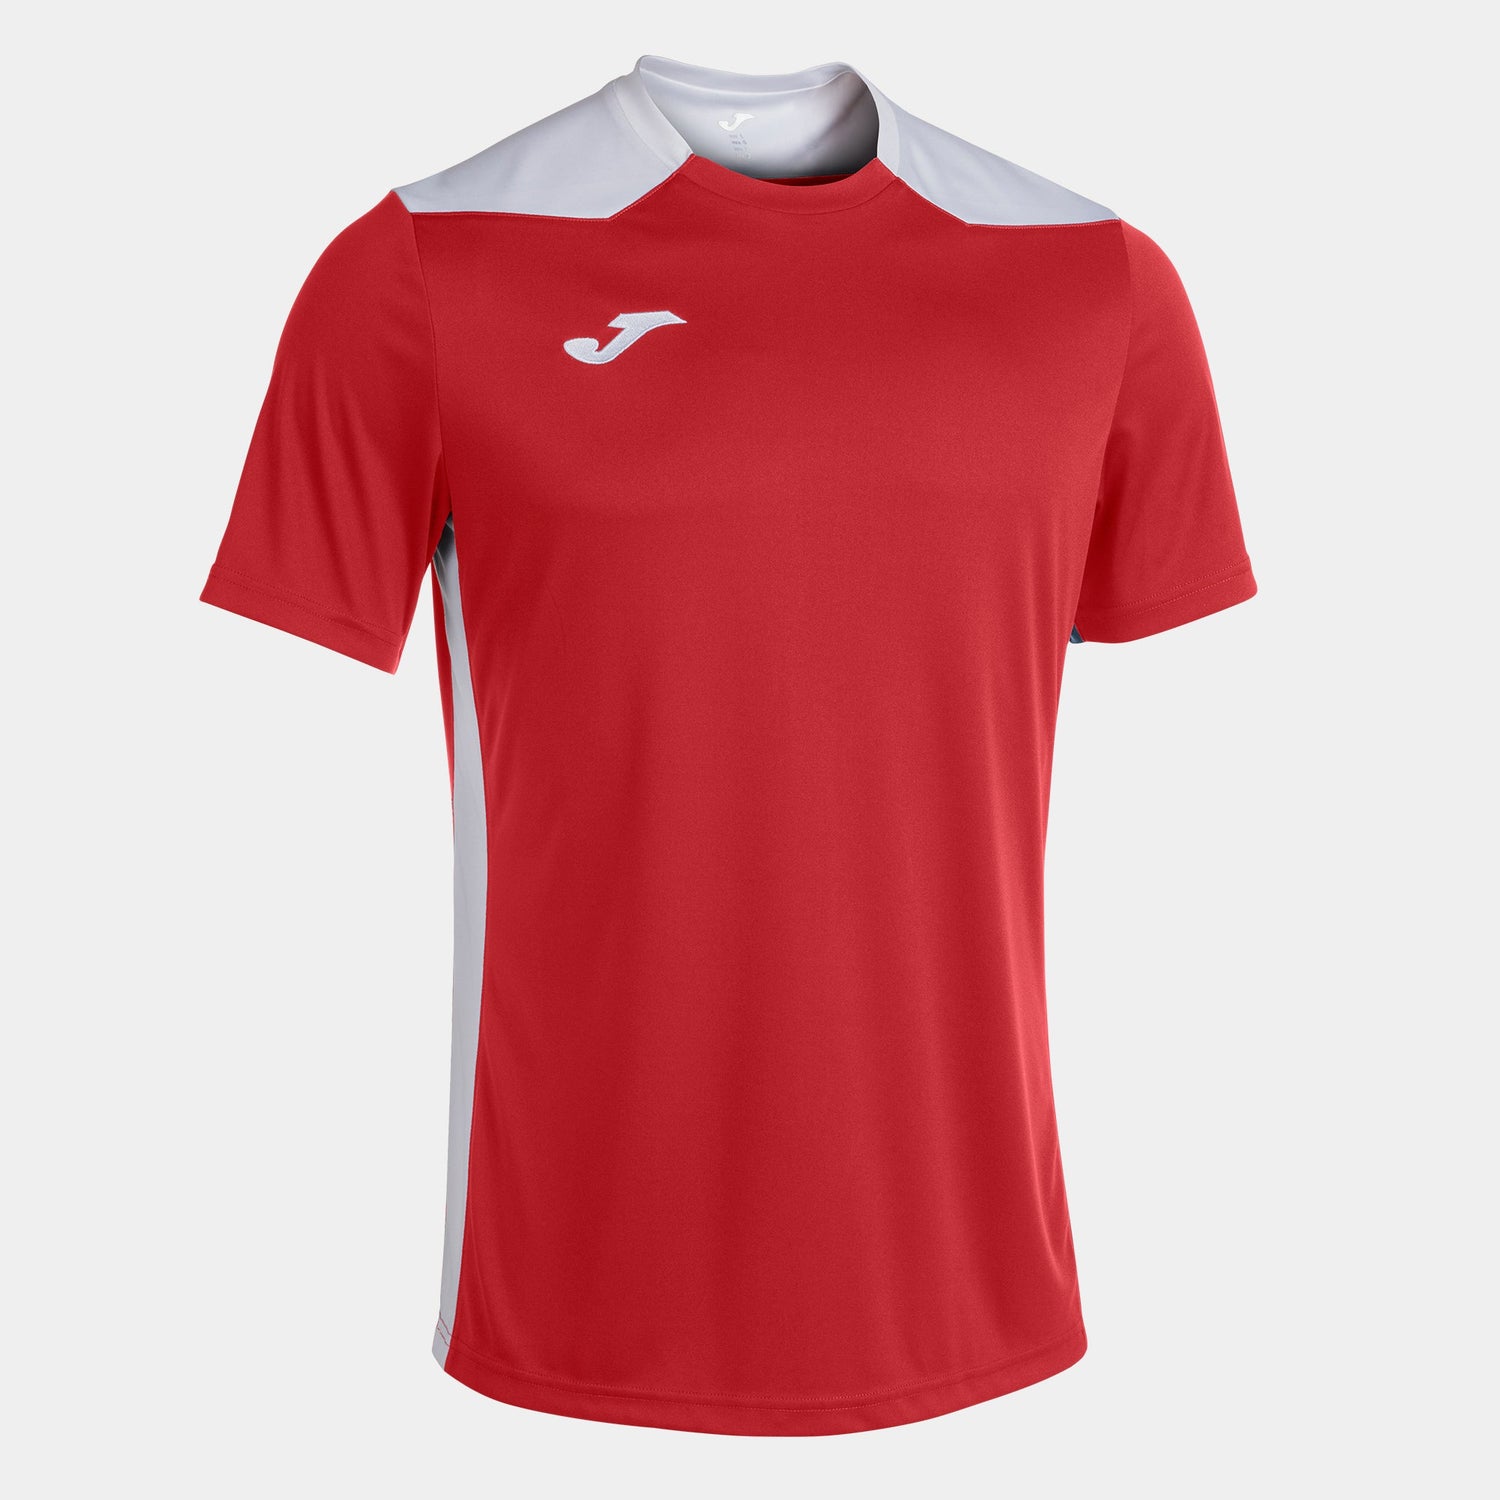 Joma Soccer Jersey available in Joma Canada Store. Customize your teamwear with sponsors and numbers. Joma is shipping in Canada